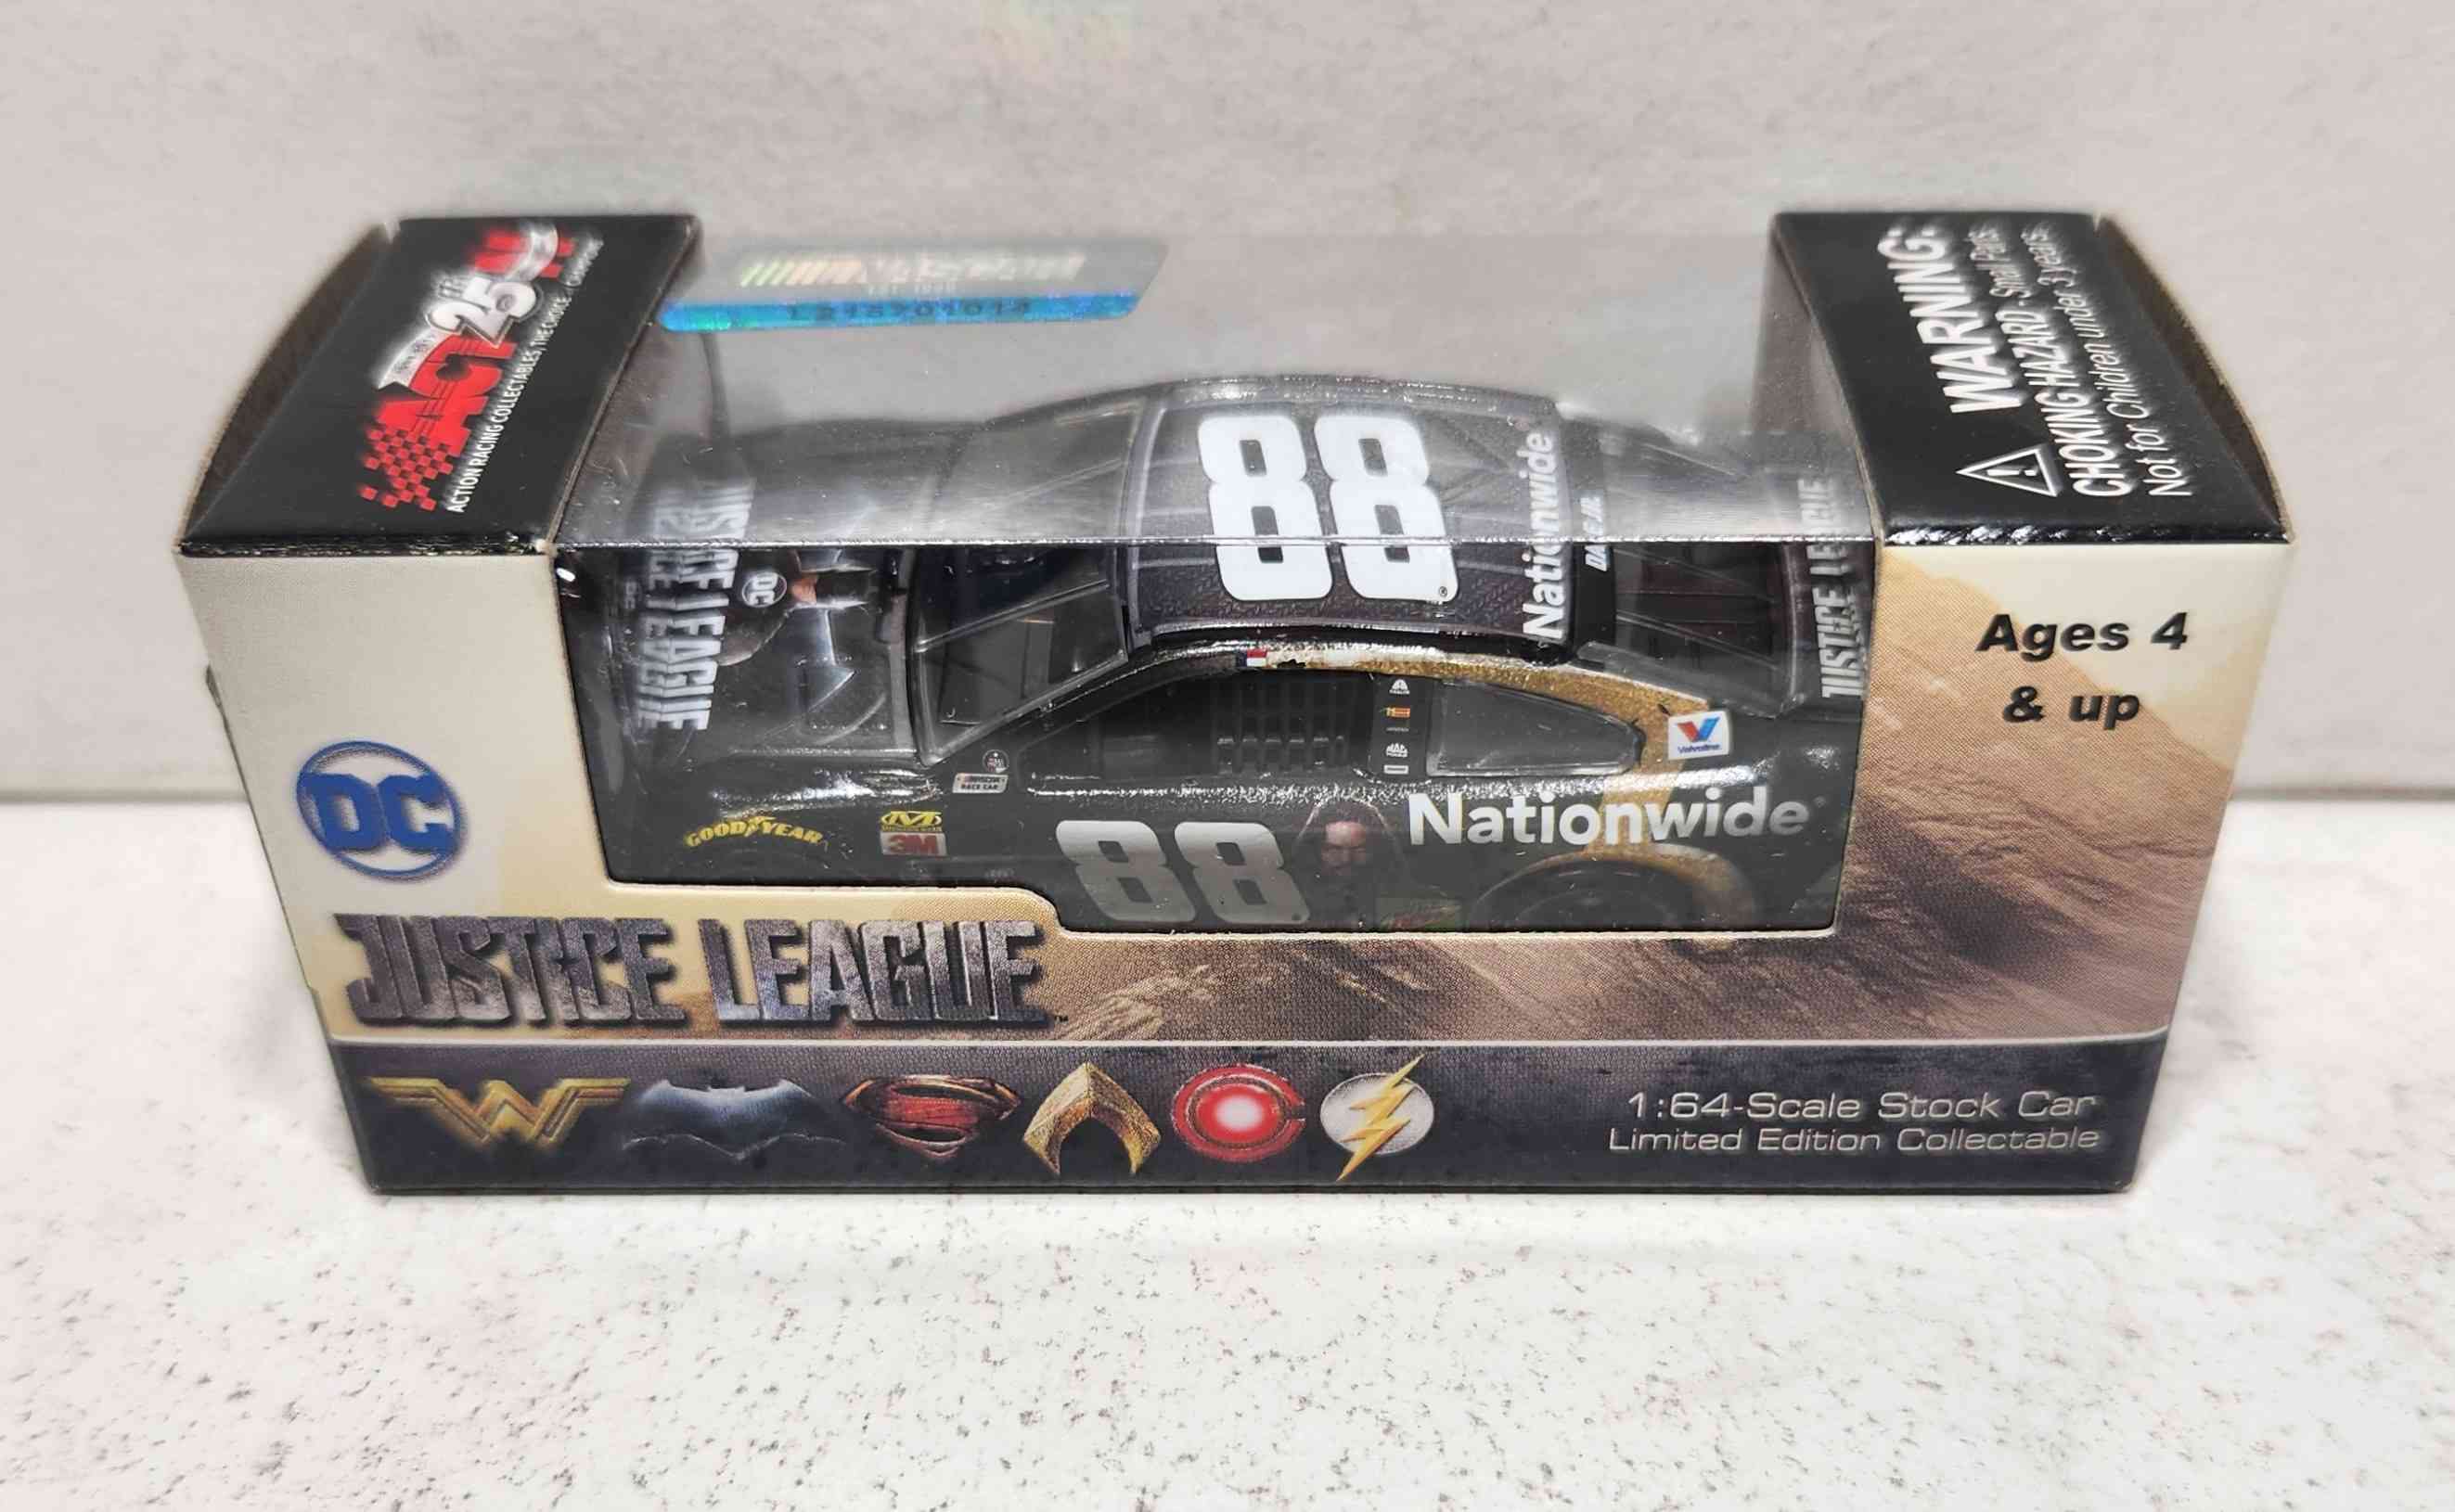 2017 Dale Earnhardt Jr 1/64th Nationwide Insurance "Justice League" Pitstop Series Chevrolet SS